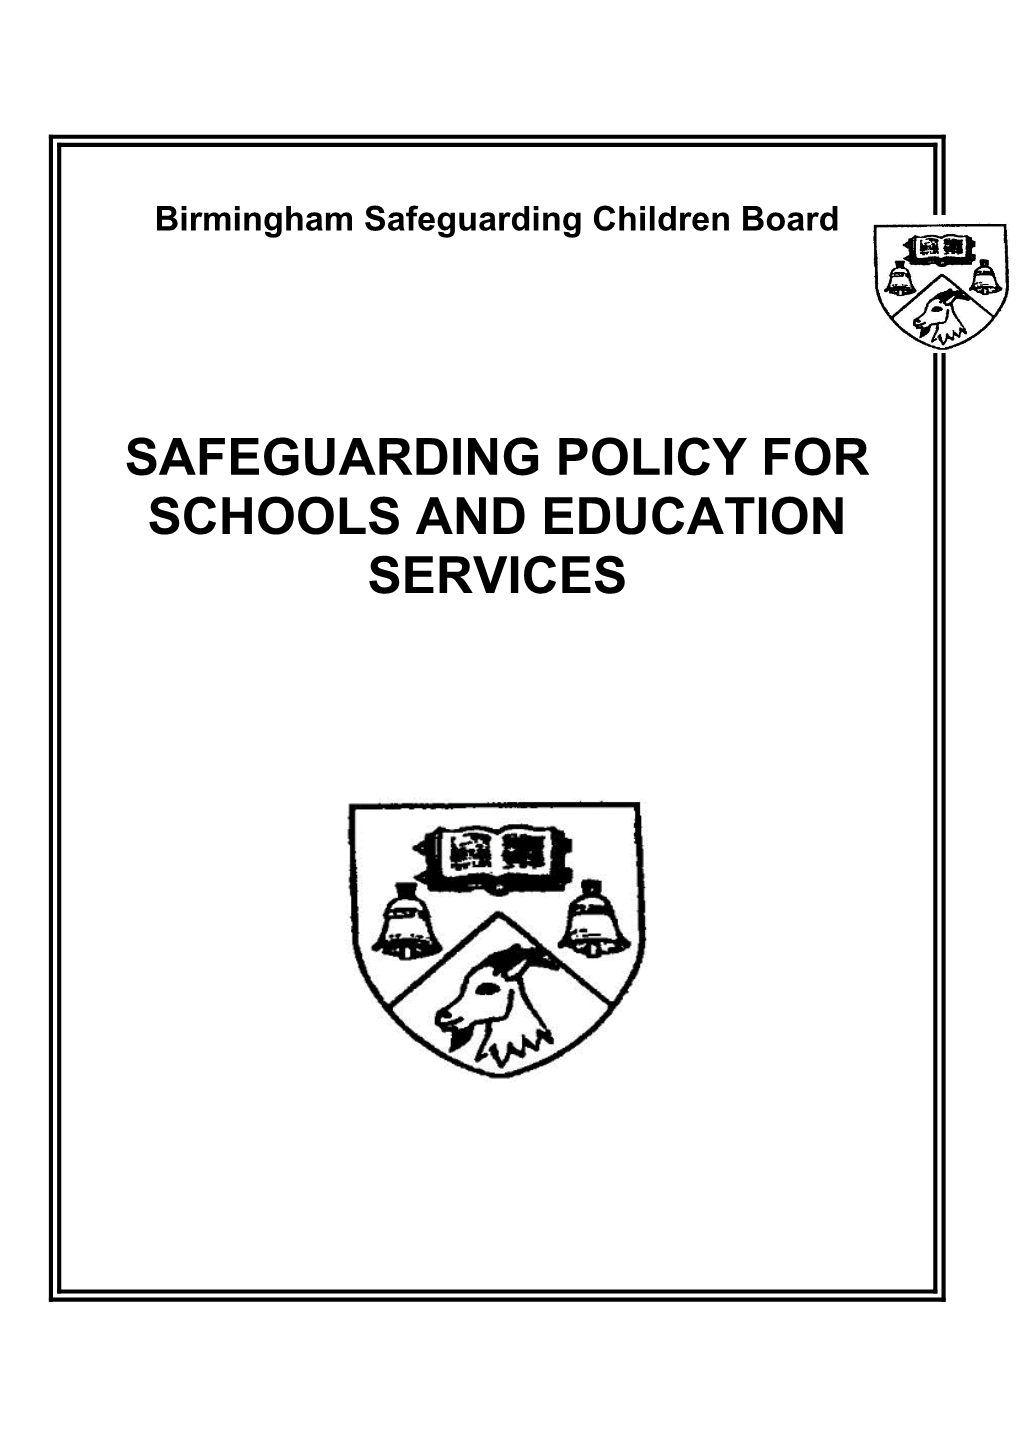 Safeguarding Policy for Schools and Education Services